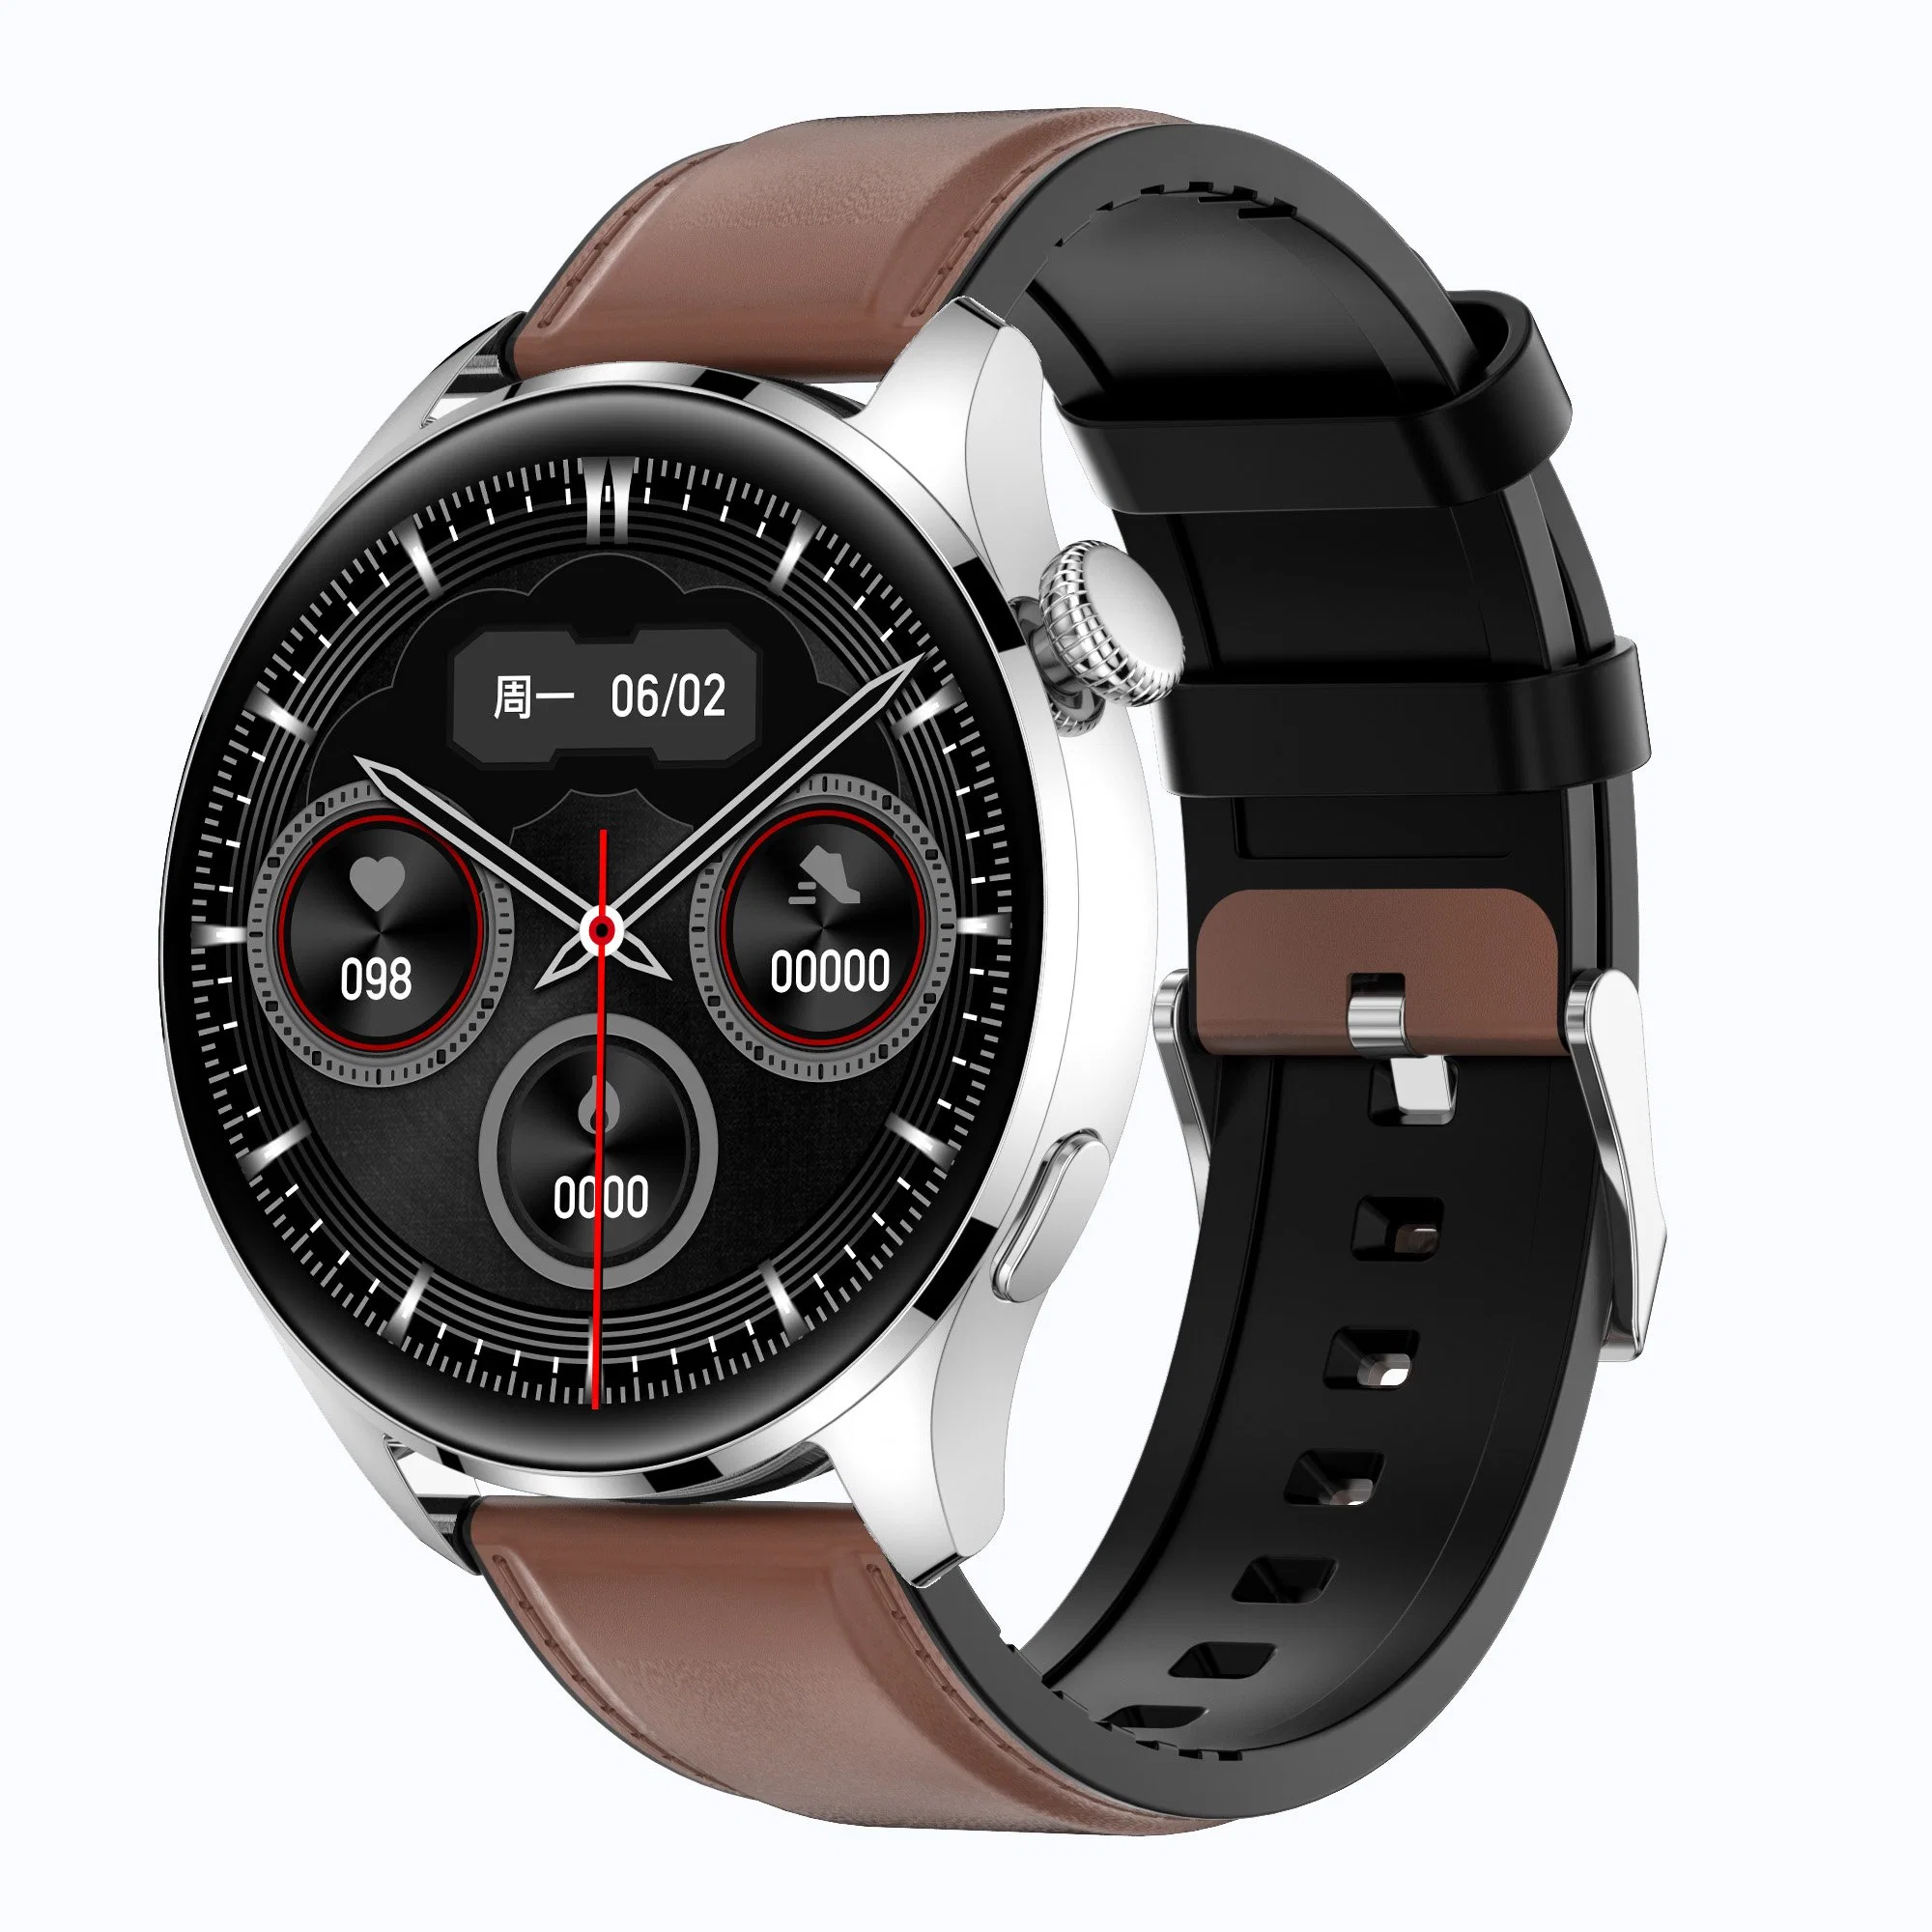 New Style Round 1.32 Inch OLED Display Metal Material Multifunctional Smart Watch